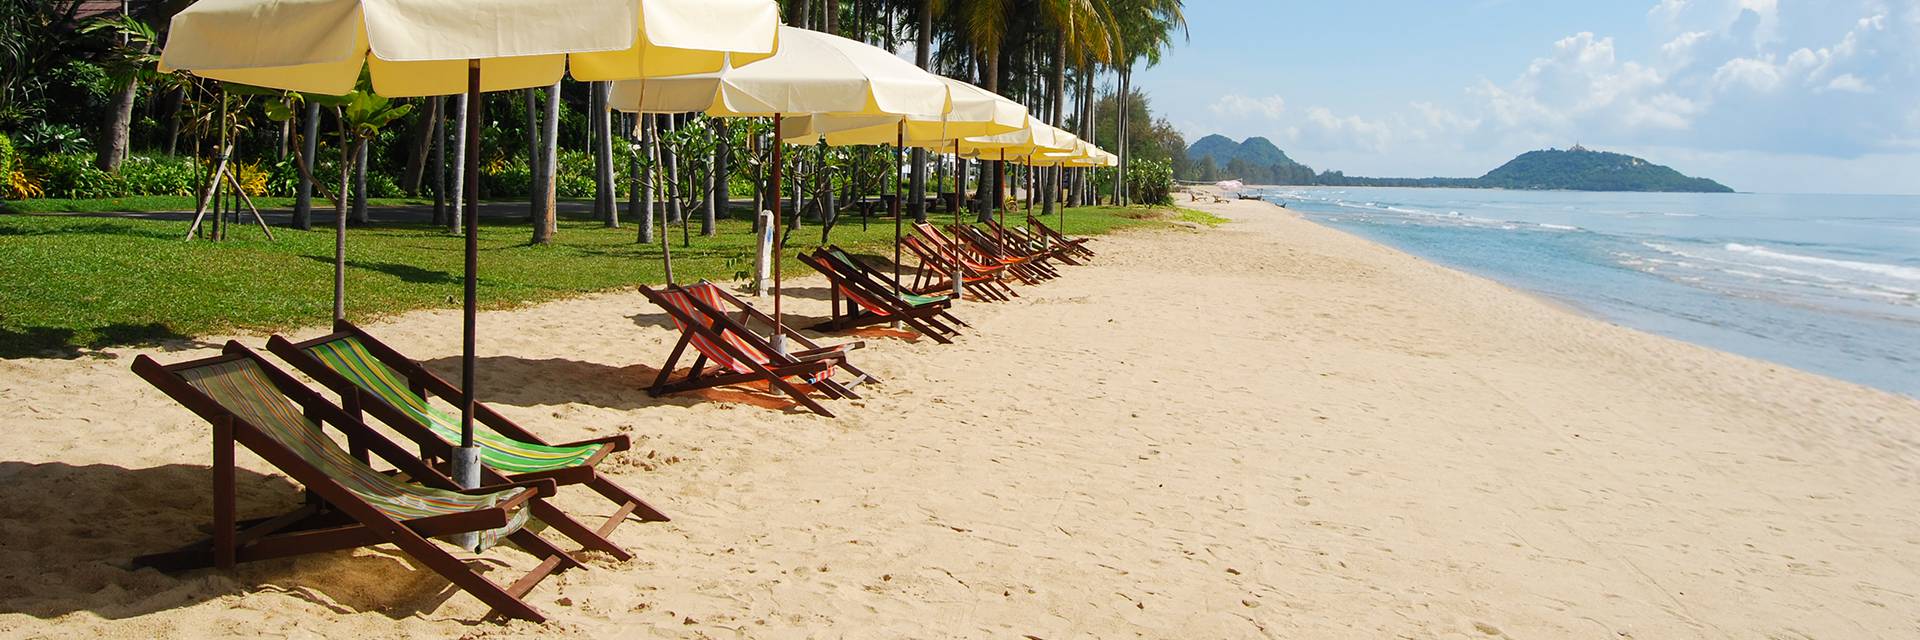 Explore the unparalleled ocean in a beach resort town of Hua Hin